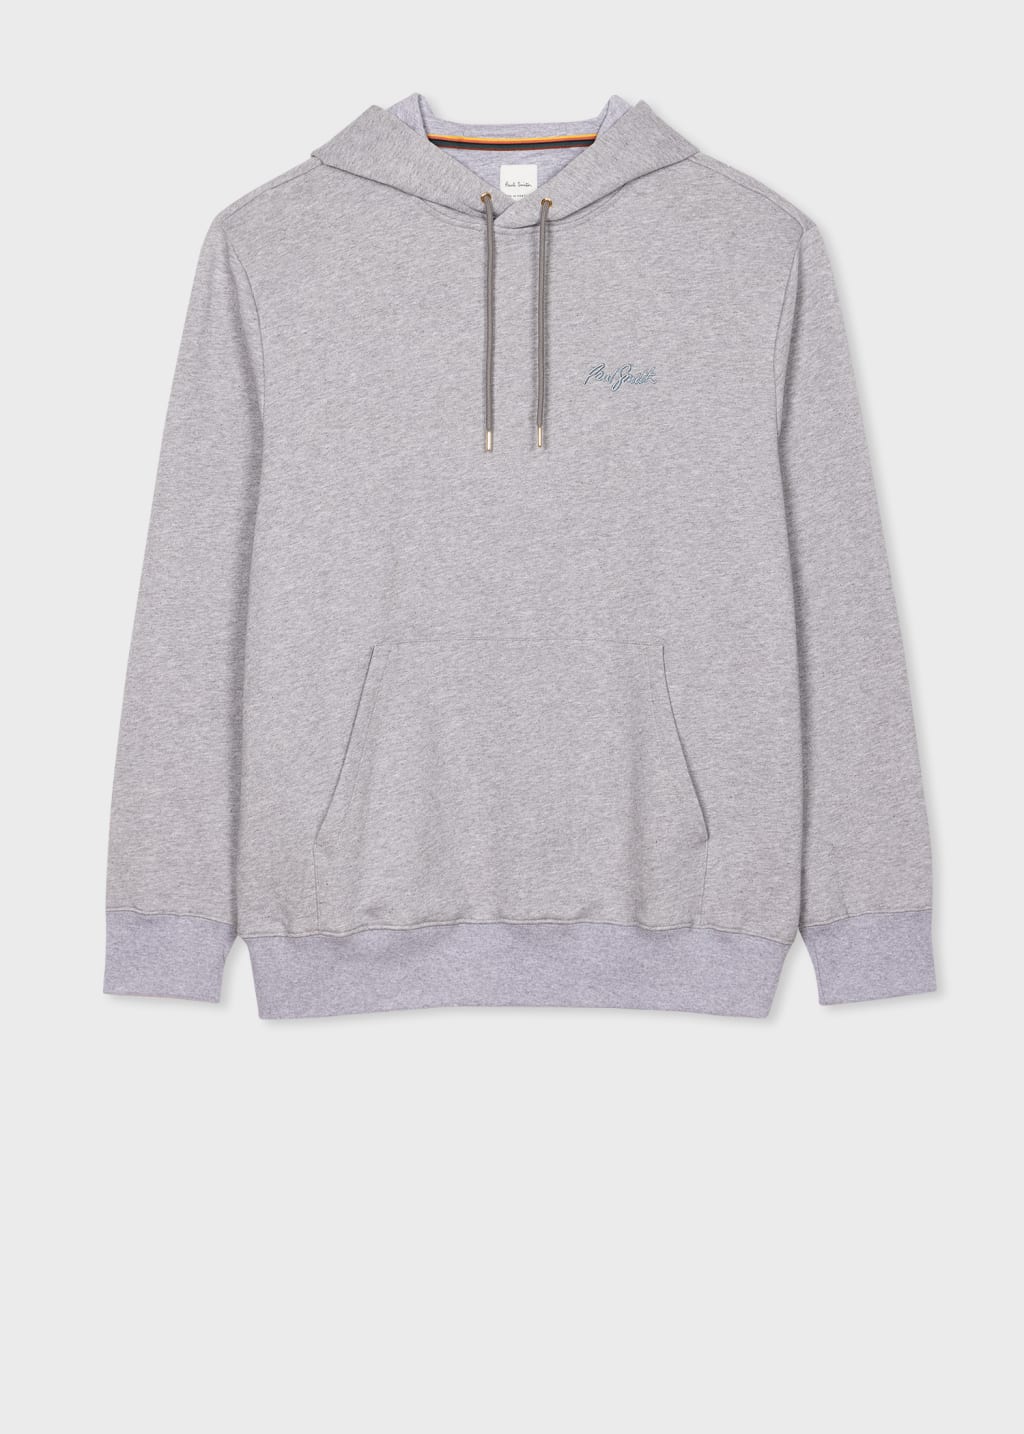 Front View - Grey Marl Cotton Shadow Logo Hoodie Paul Smith